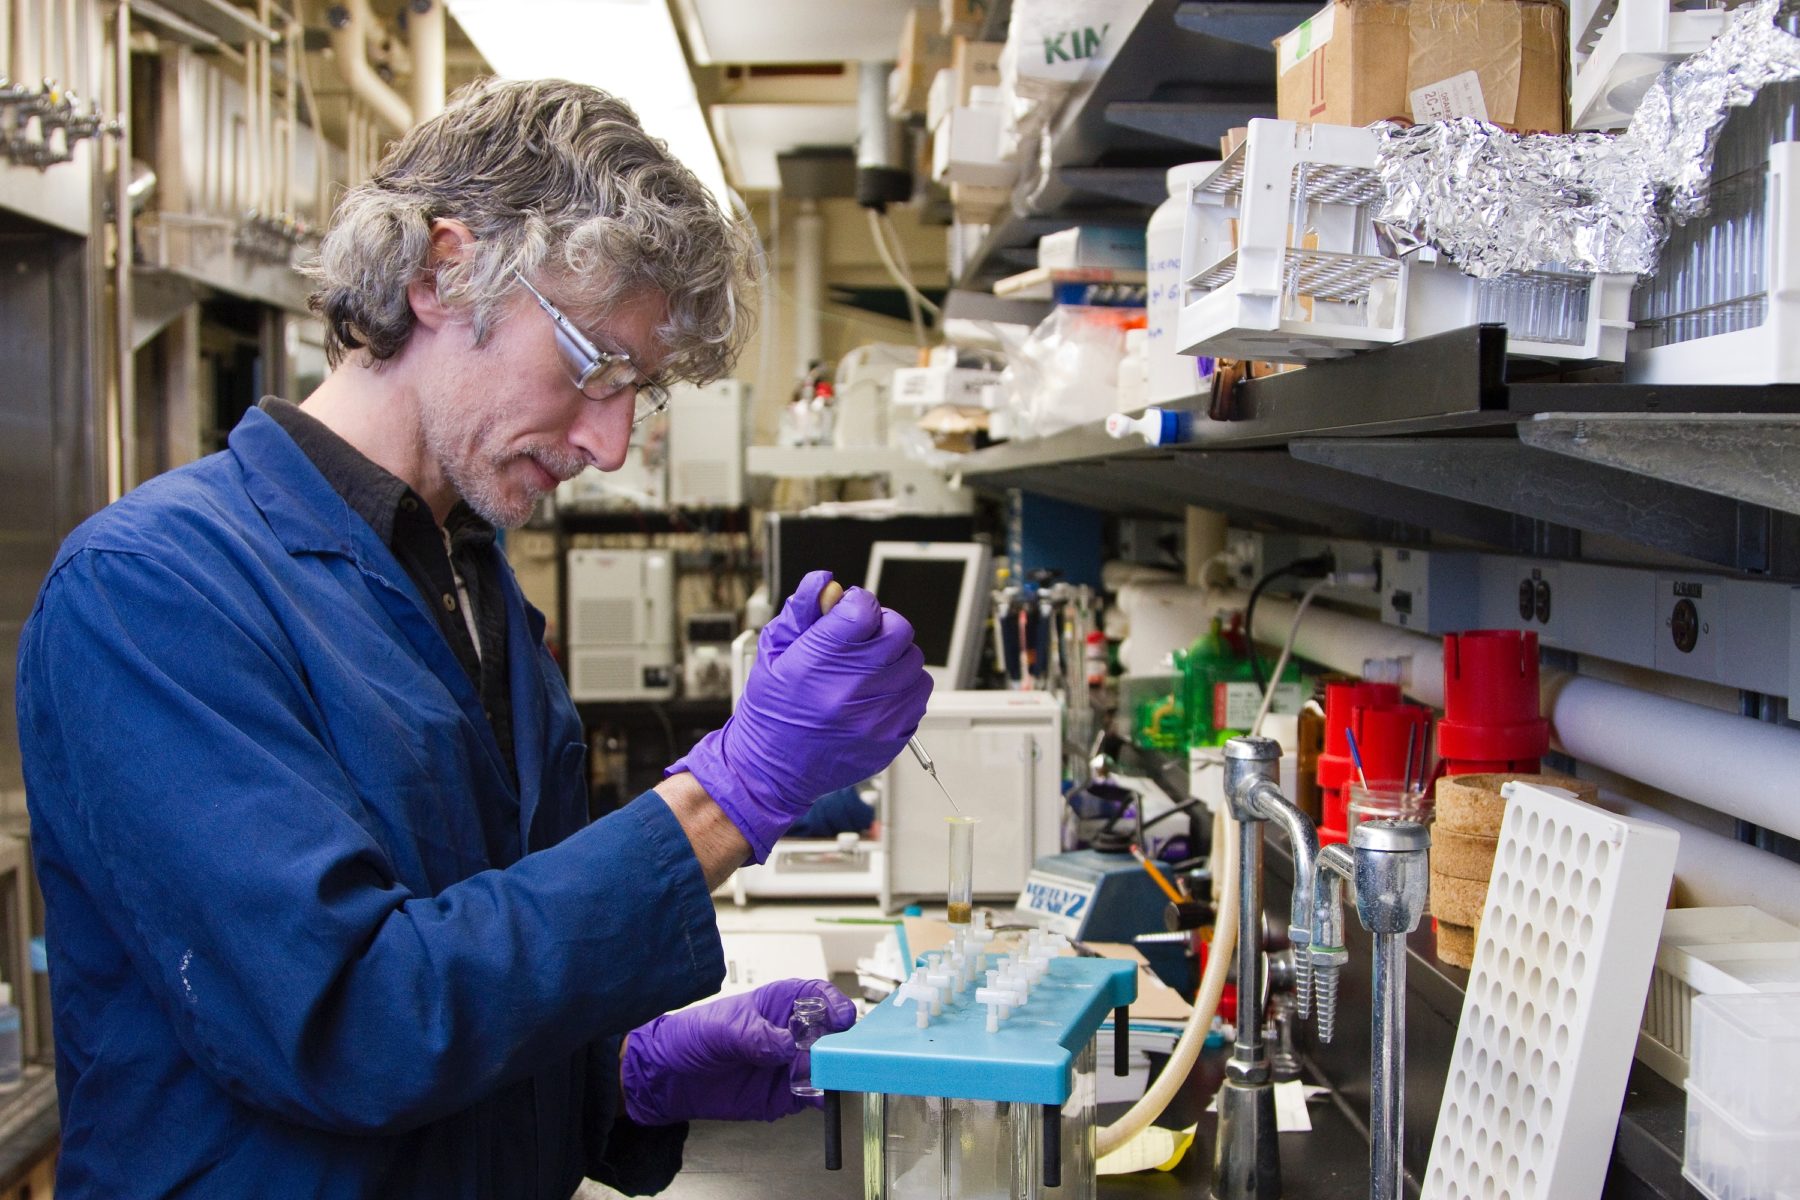 The National Cancer Institute's Natural Products Branch at the Frederick National Laboratory for Cancer Research is the largest program to collect materials worldwide from marine, plant, and microbial sources so they may be studied for possible medical uses.